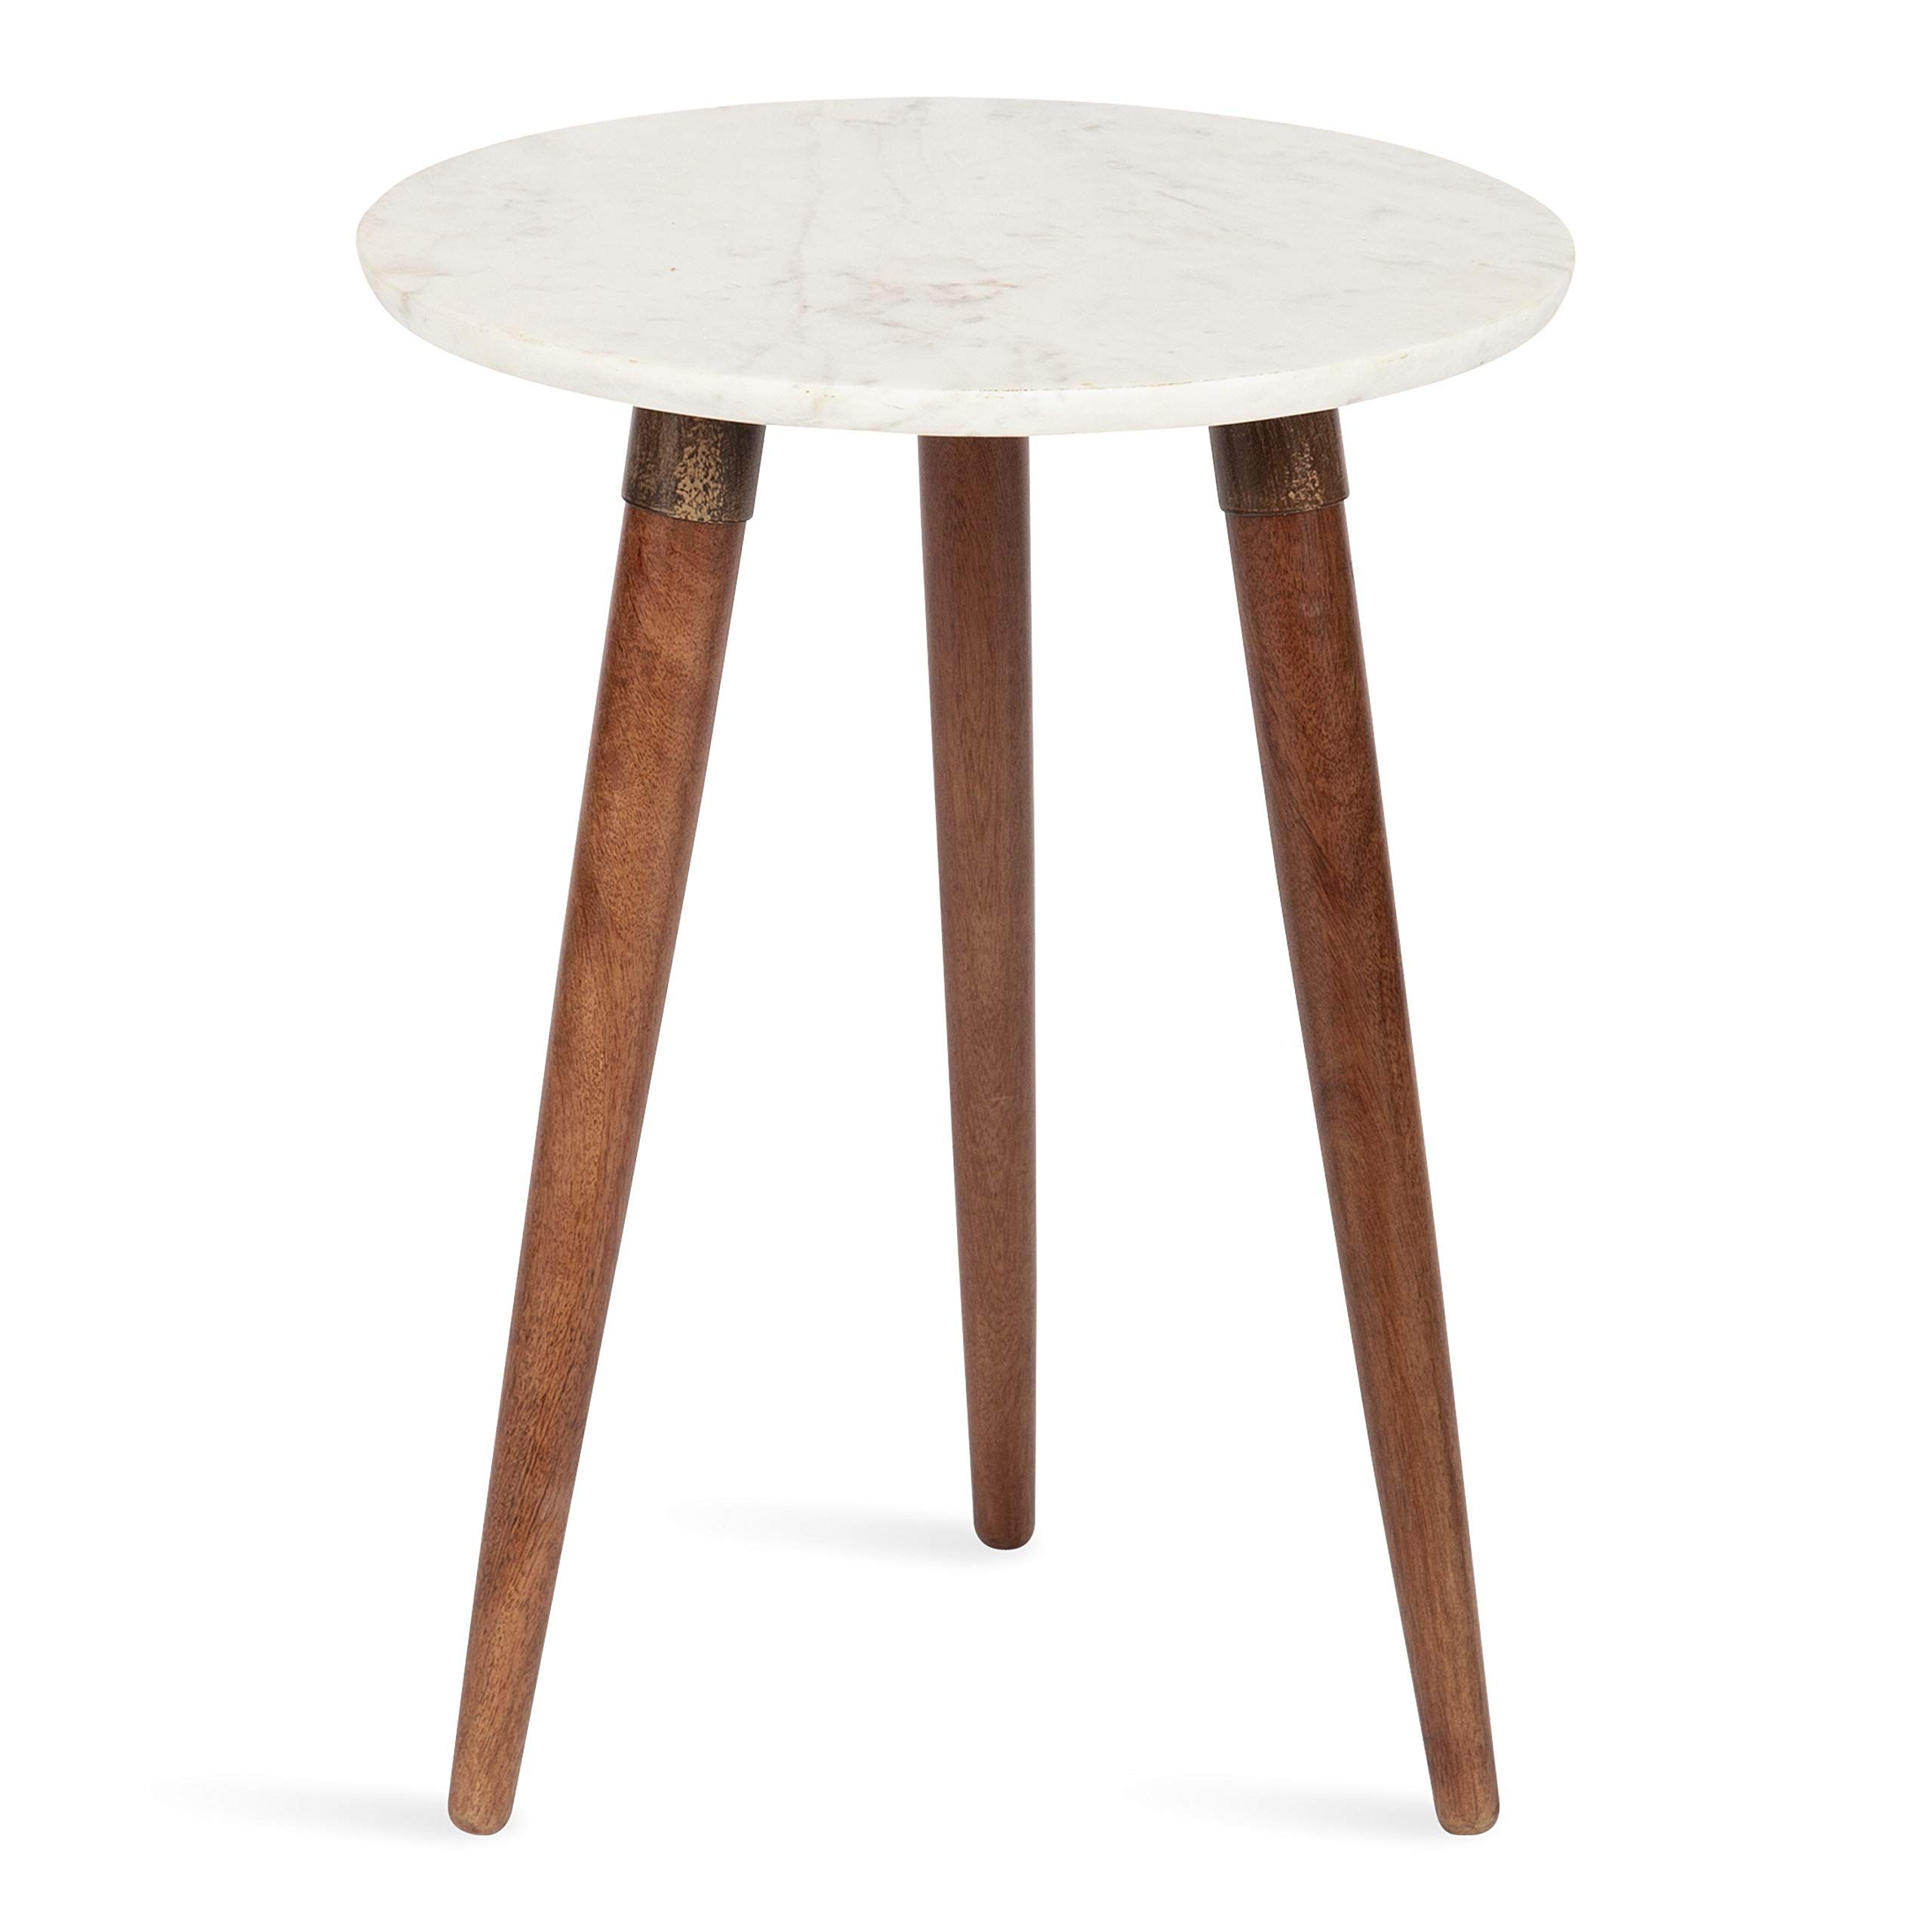 Kate and Laurel Rumsen Round Side Table, 16 x 16 x 21, White and Walnut Brown, Modern Tripod End Tab | Amazon (US)